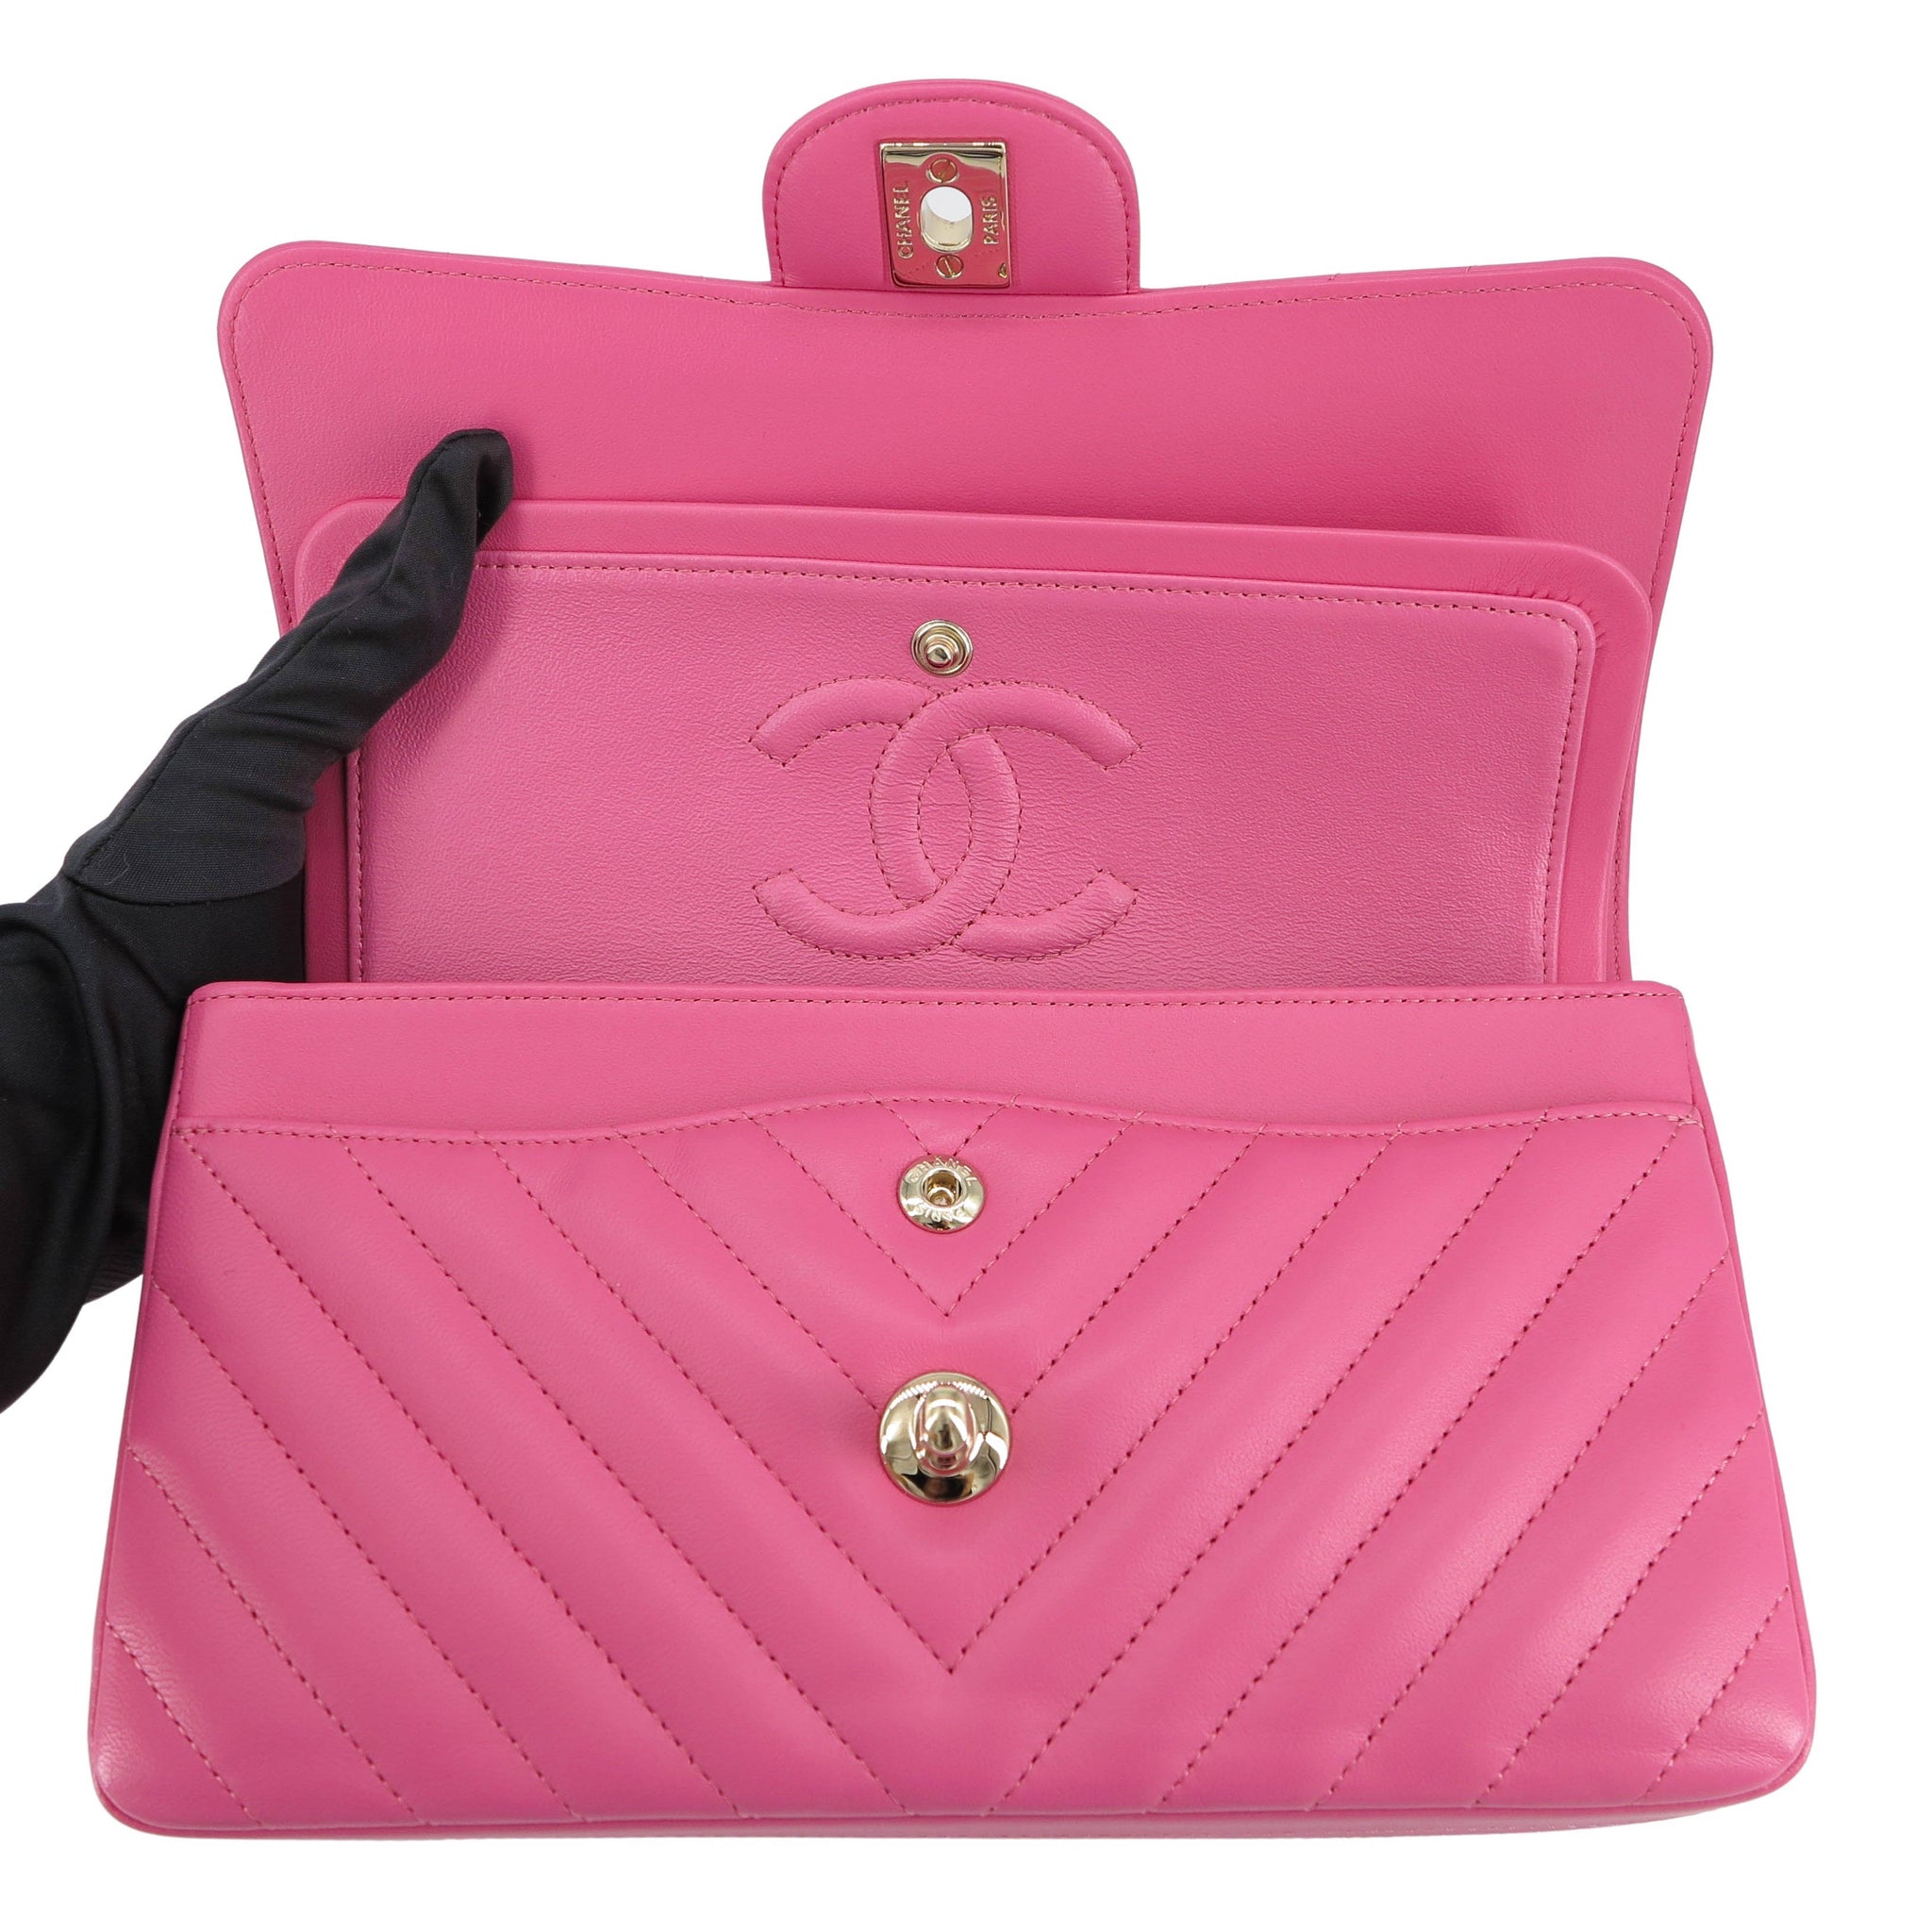 CHANEL Small Chevron Classic Double Flap Bag in 19C Barbie Pink | Dearluxe